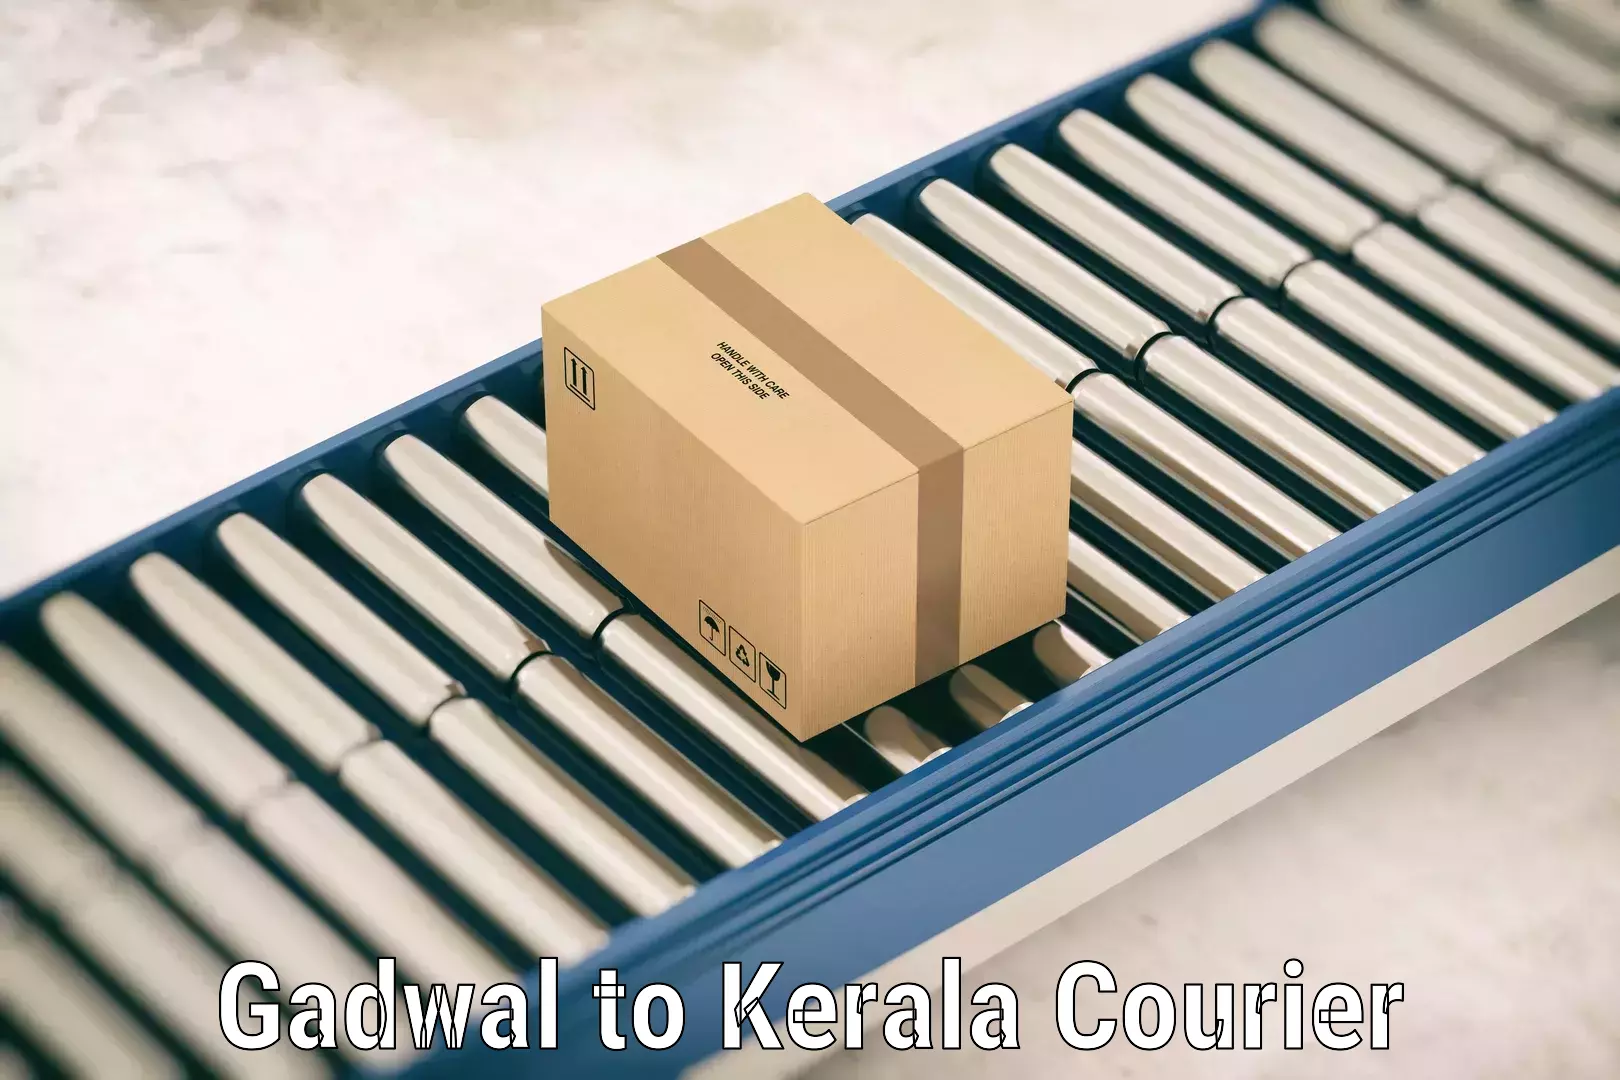 Luggage transport consulting Gadwal to Kerala